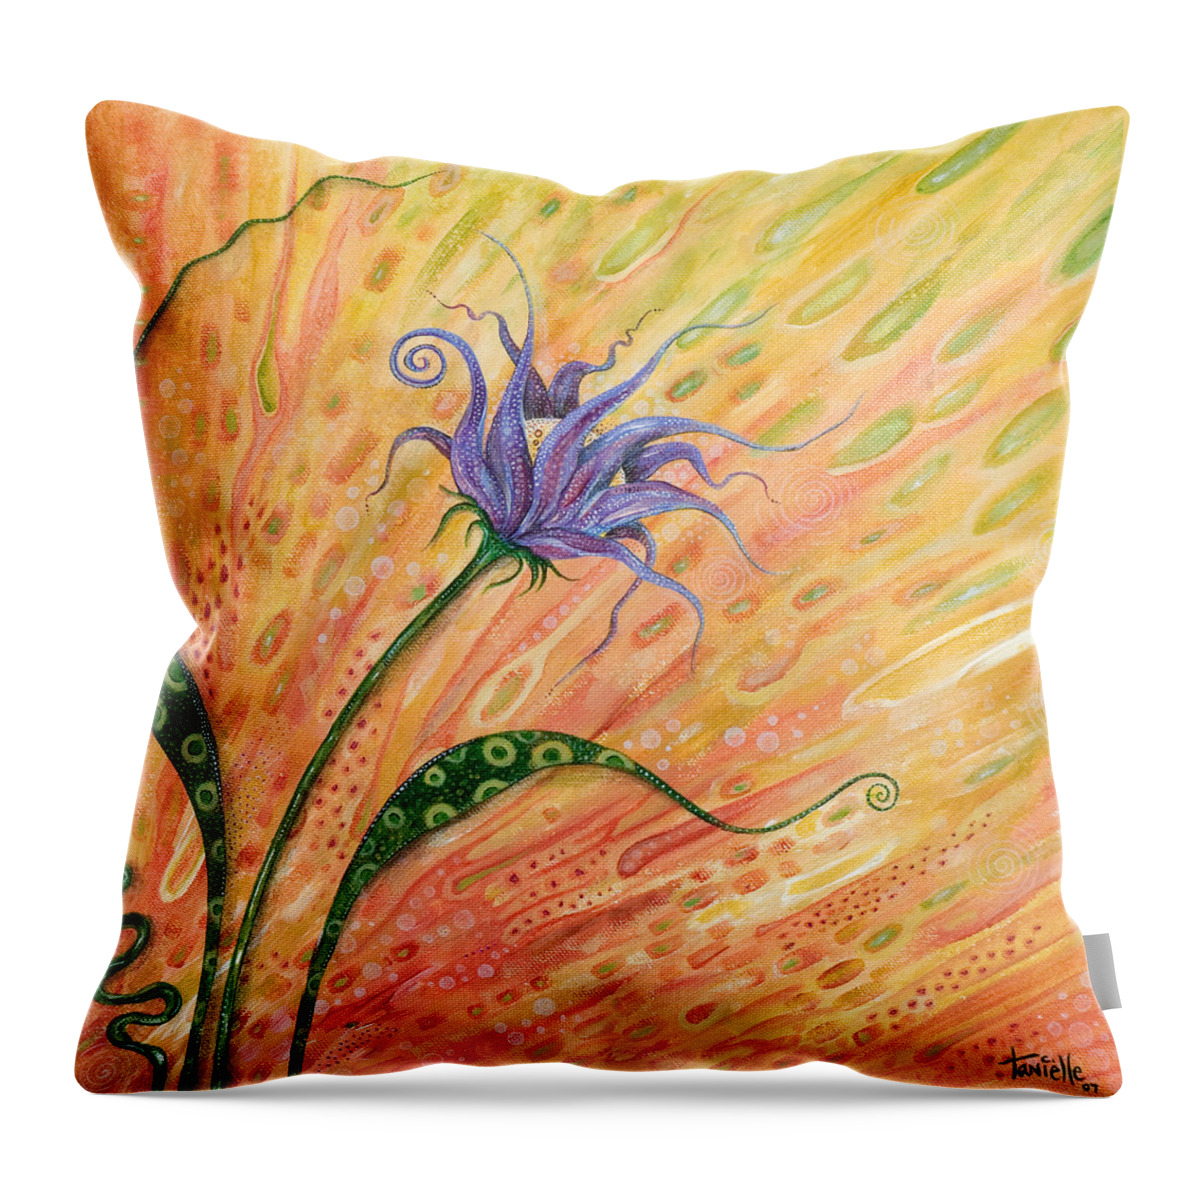 Floral Throw Pillow featuring the painting Verve by Tanielle Childers